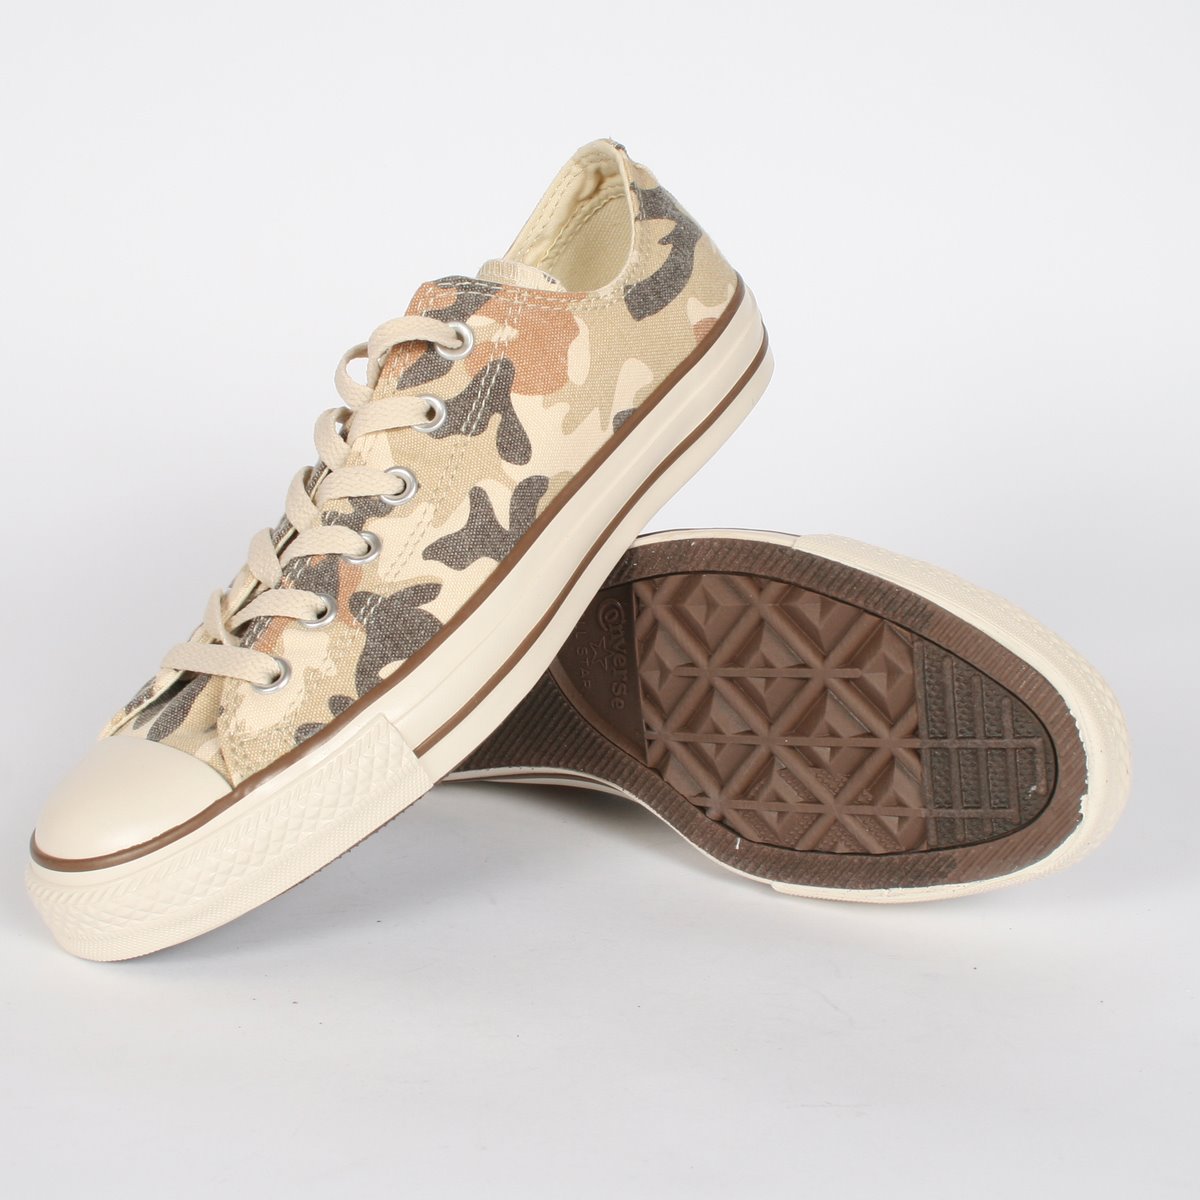 Converse Chuck Taylor Low Top Shoes in Desert Camo (1X892)